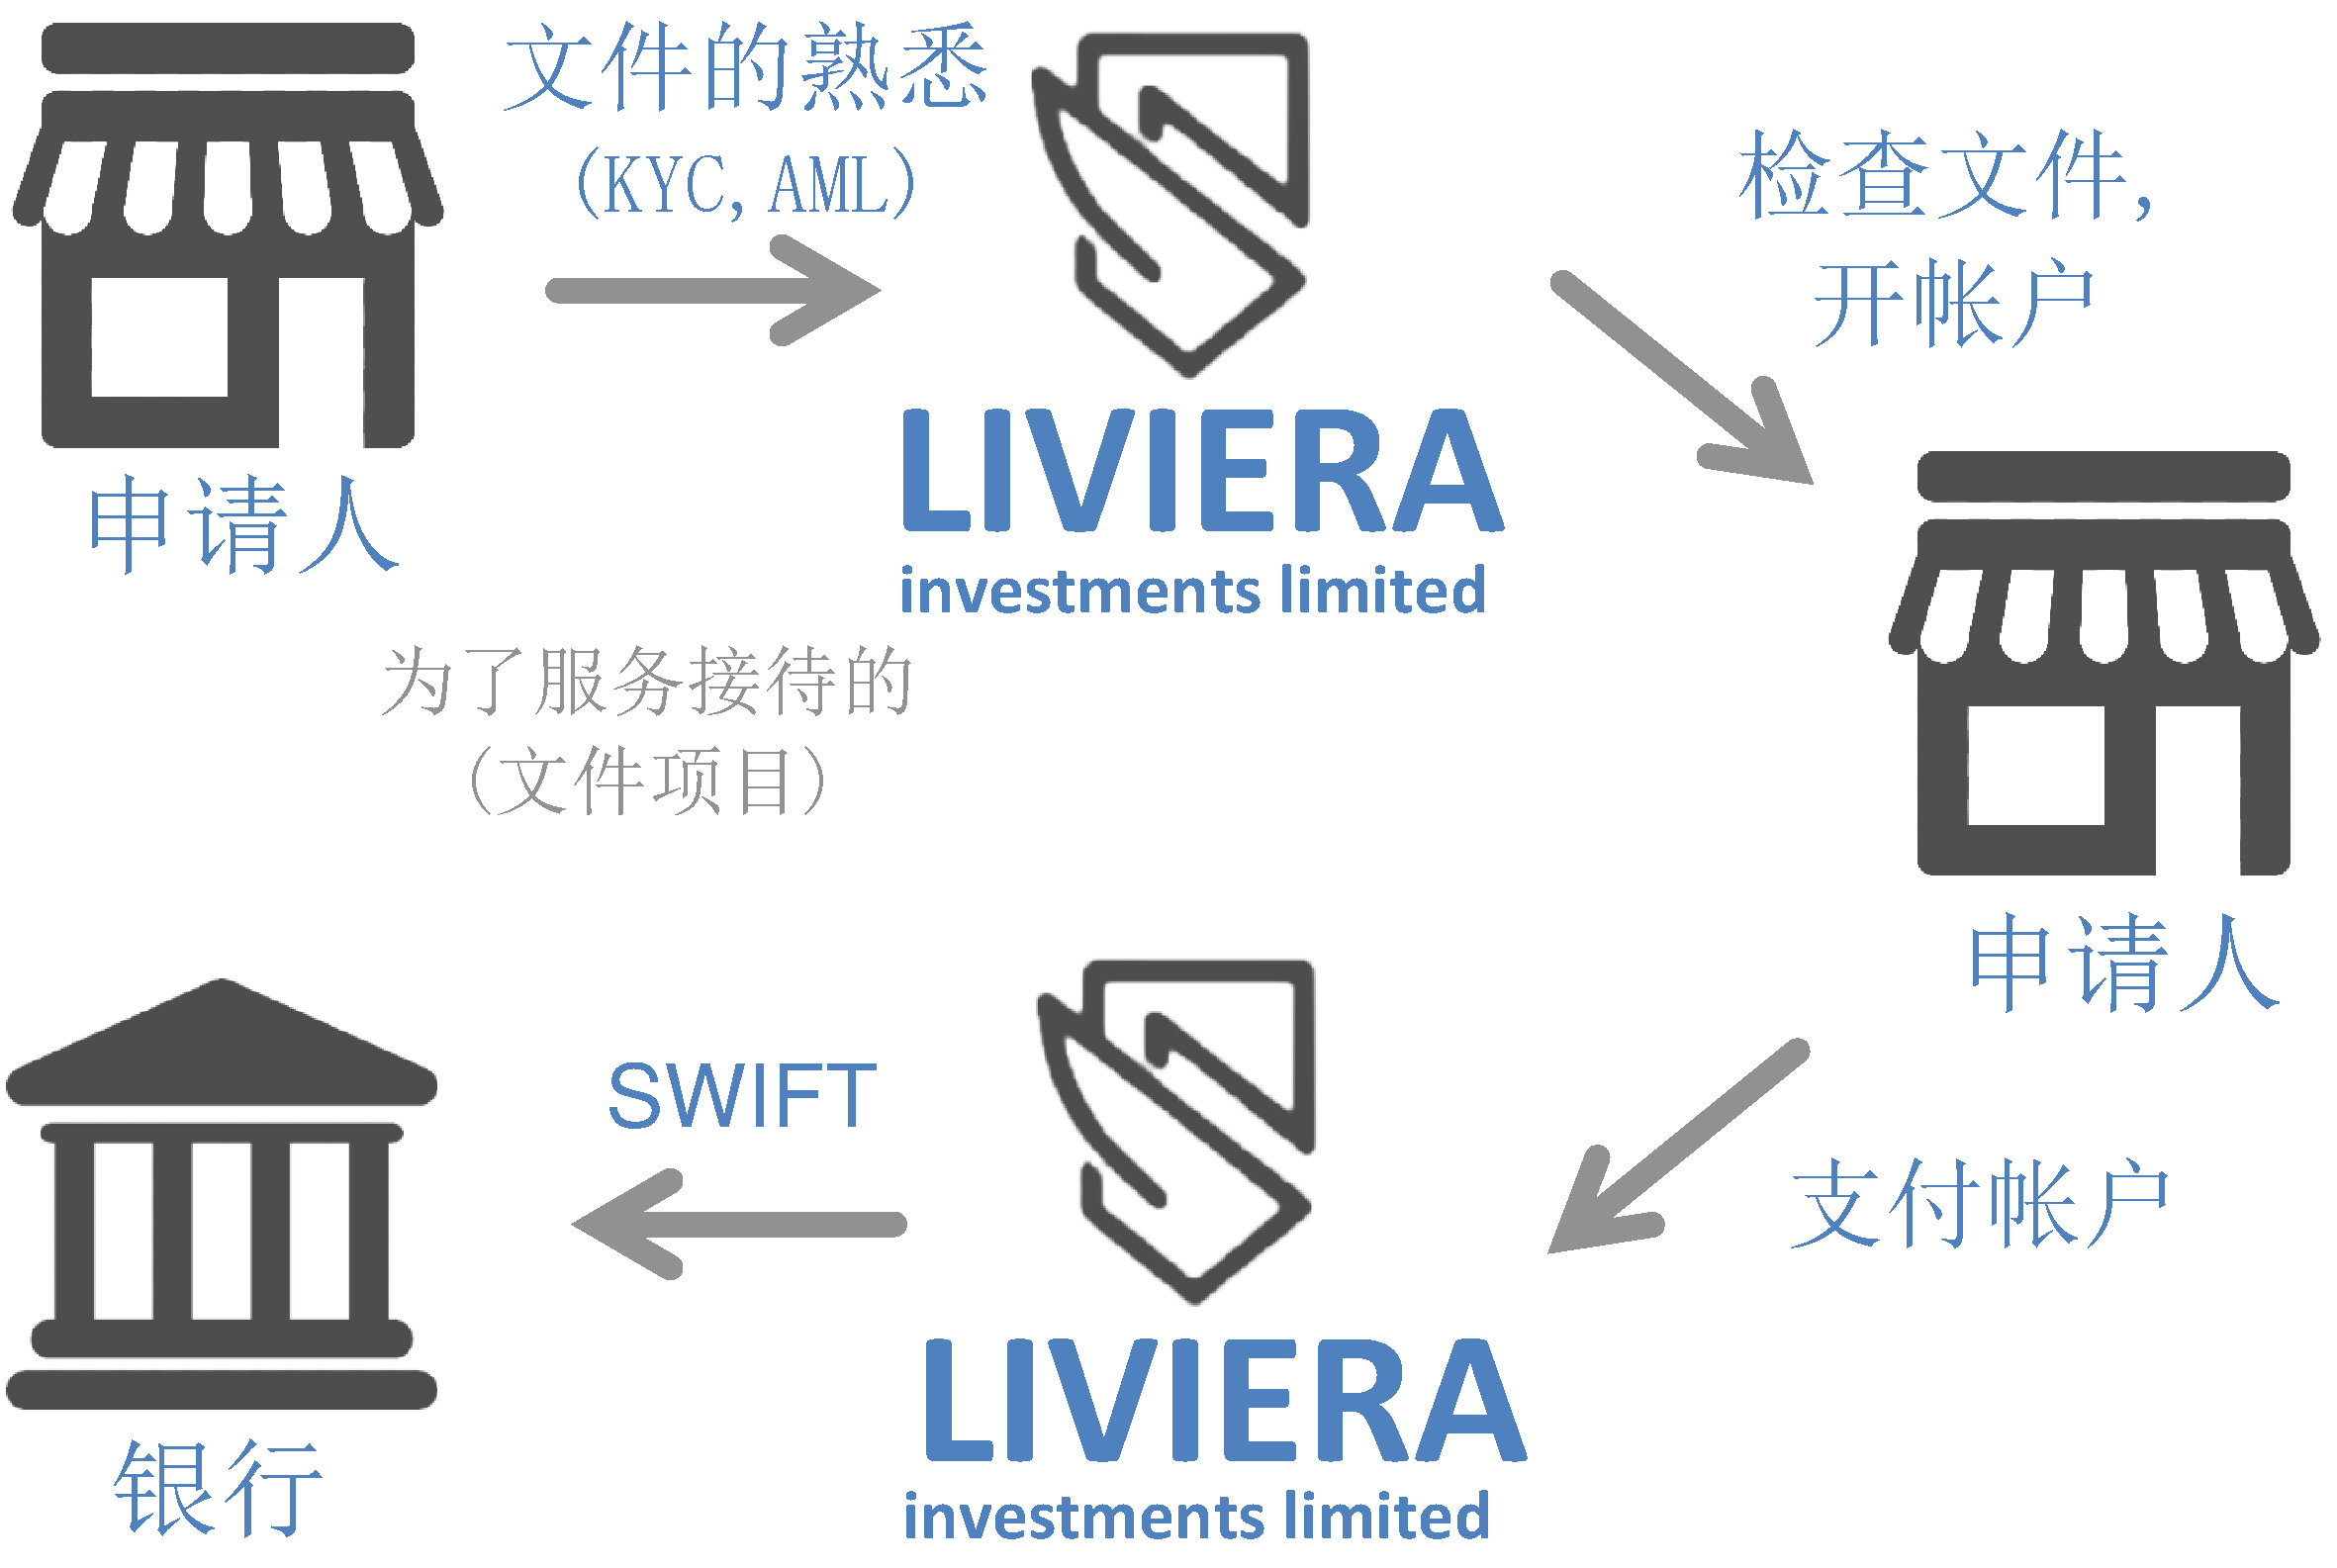 Scheme of cooperation with Liviera Investments Limited